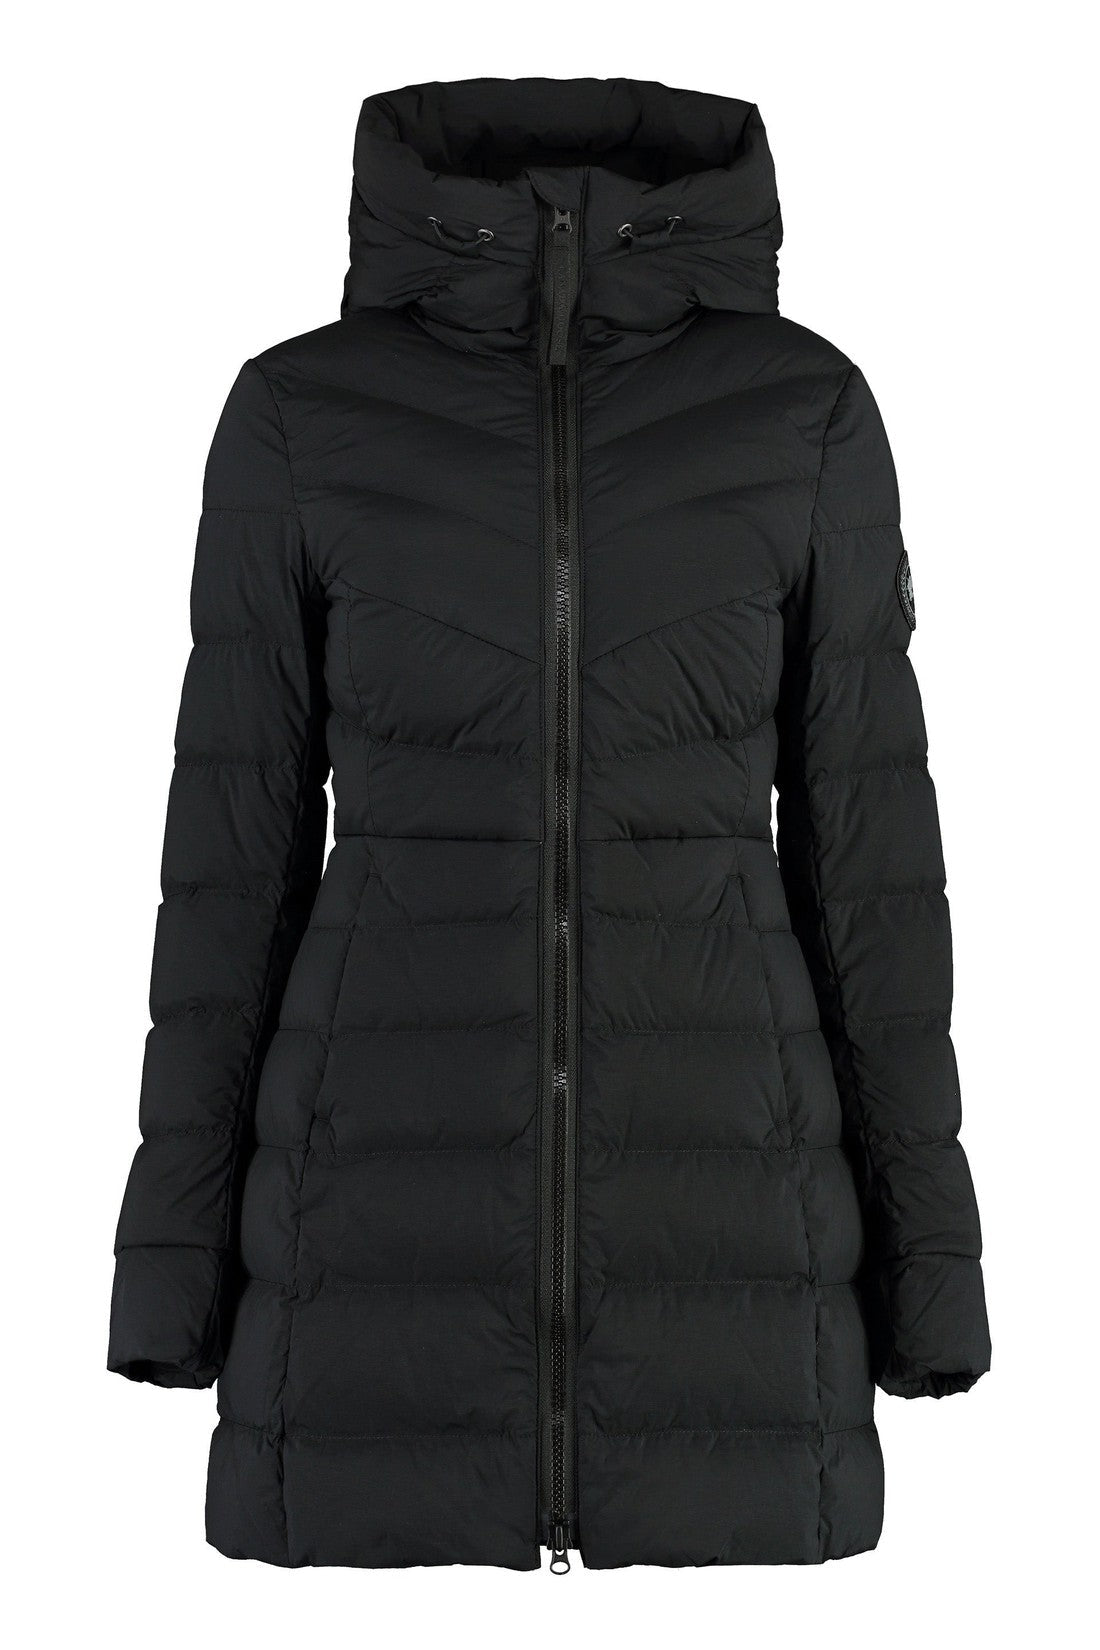 Canada Goose Black-OUTLET-SALE-Clair hooded nylon down jacket-ARCHIVIST